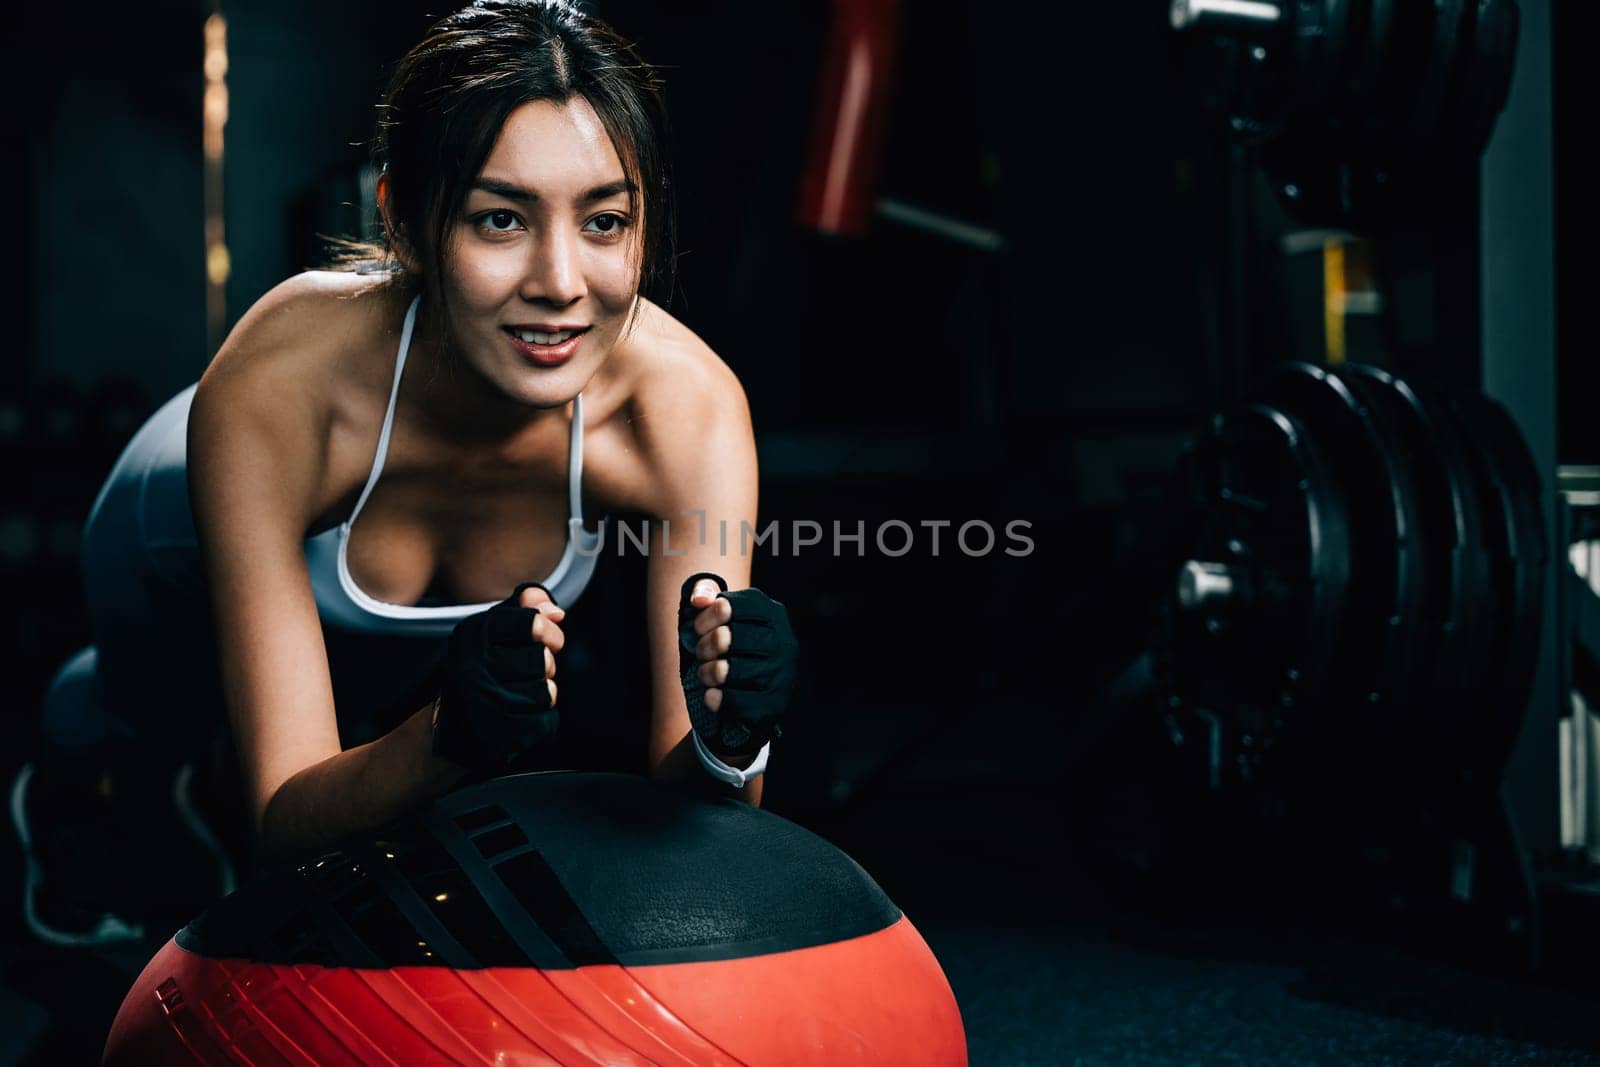 Young woman using a stability ball to challenge her plank position during an indoor gym workout, promoting strength and fitness care, exercise in dark gym background